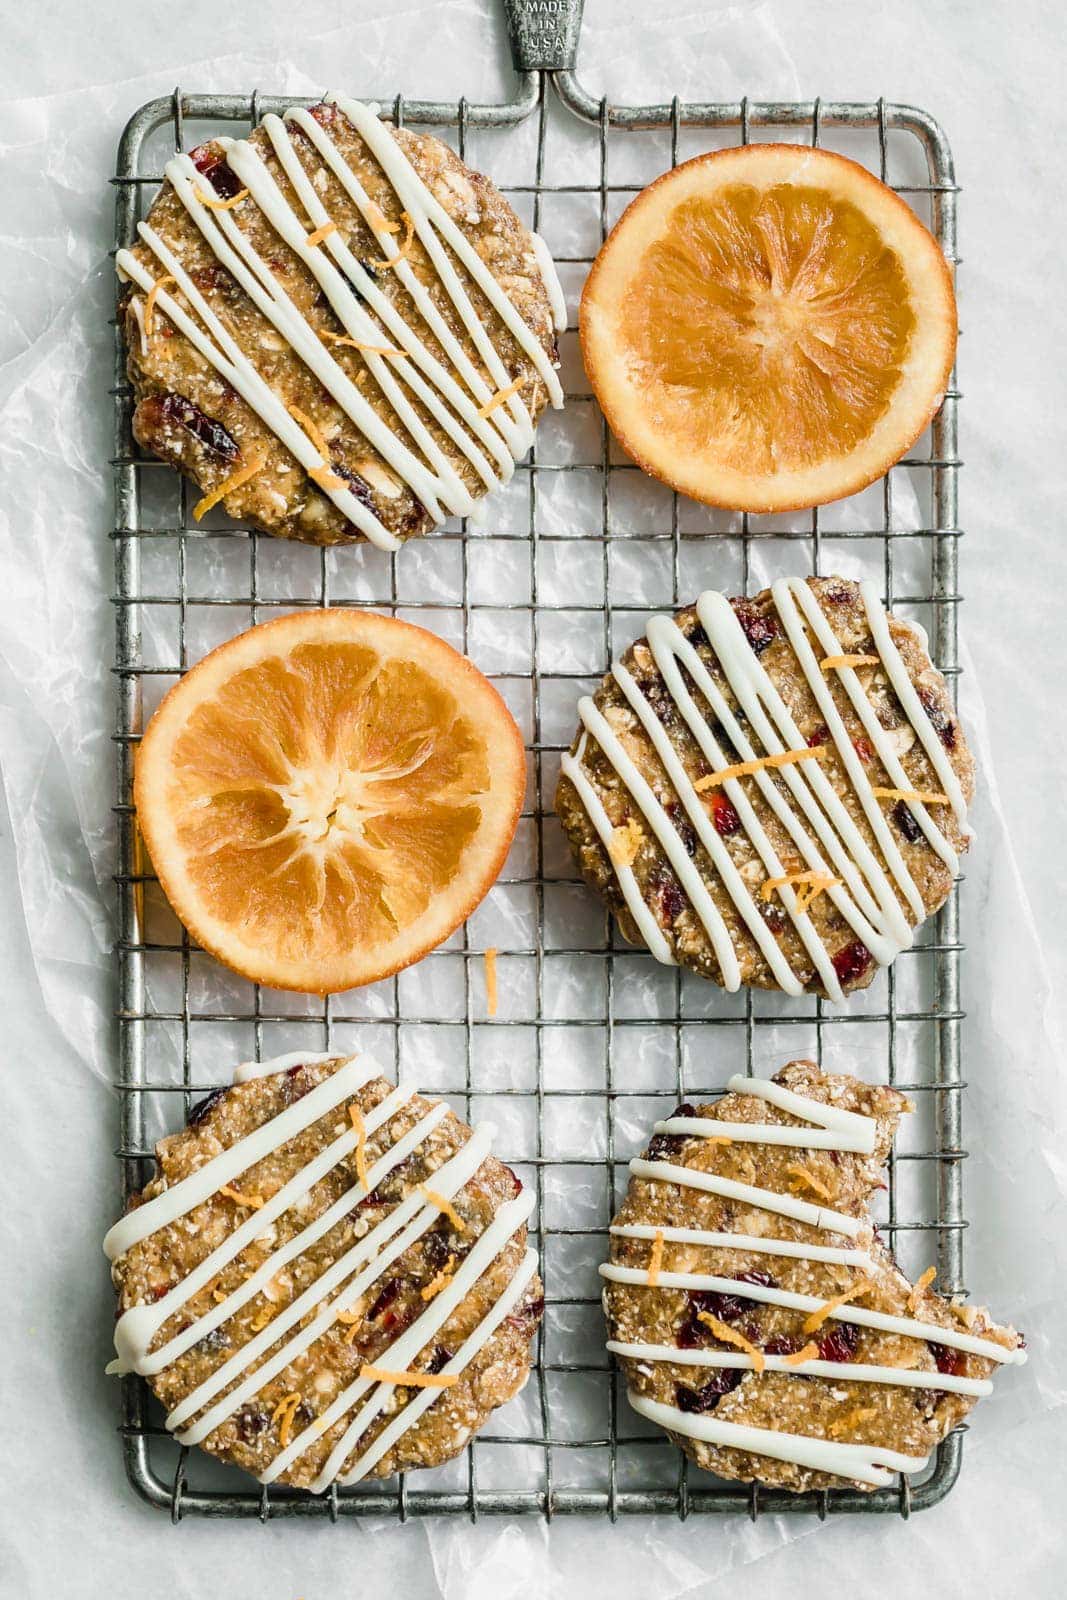 Raw, gluten-free, and vegan, these No-Bake Cranberry Orange Breakfast Bars are the best way to start your day.